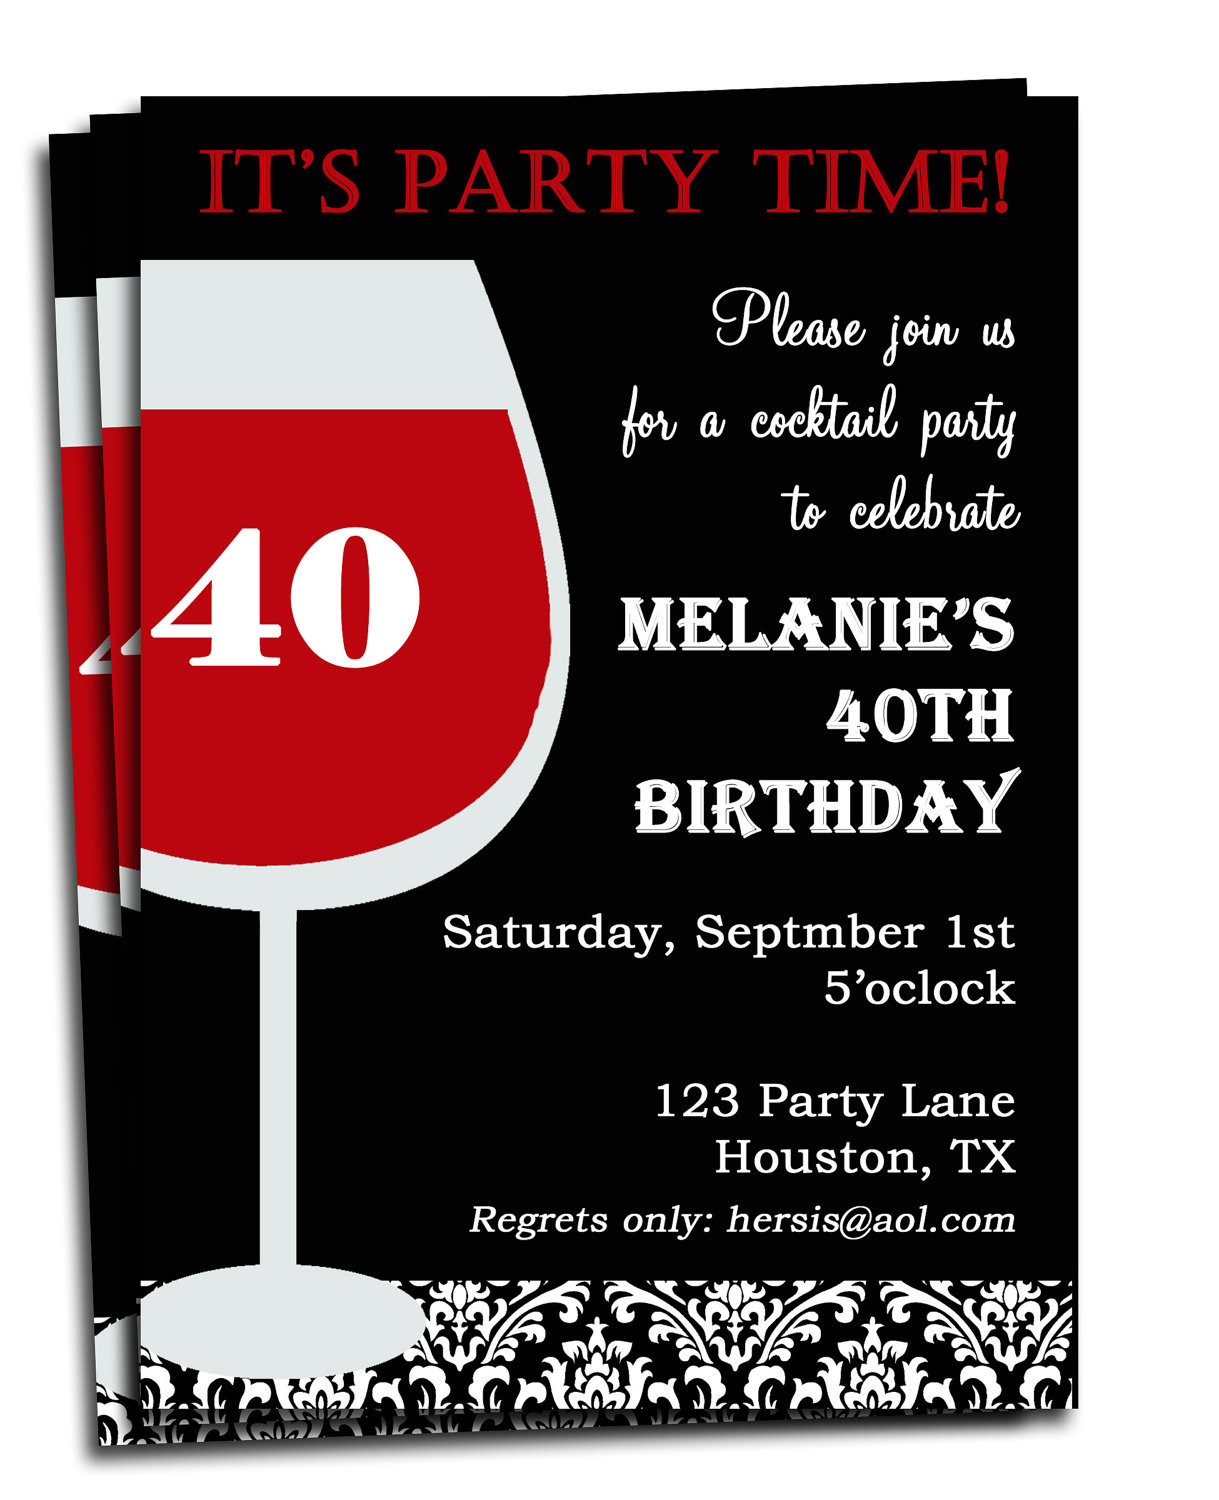 Free Printable Birthday Invitations For Adults
 Adult Birthday Invitation Printable Personalized for your